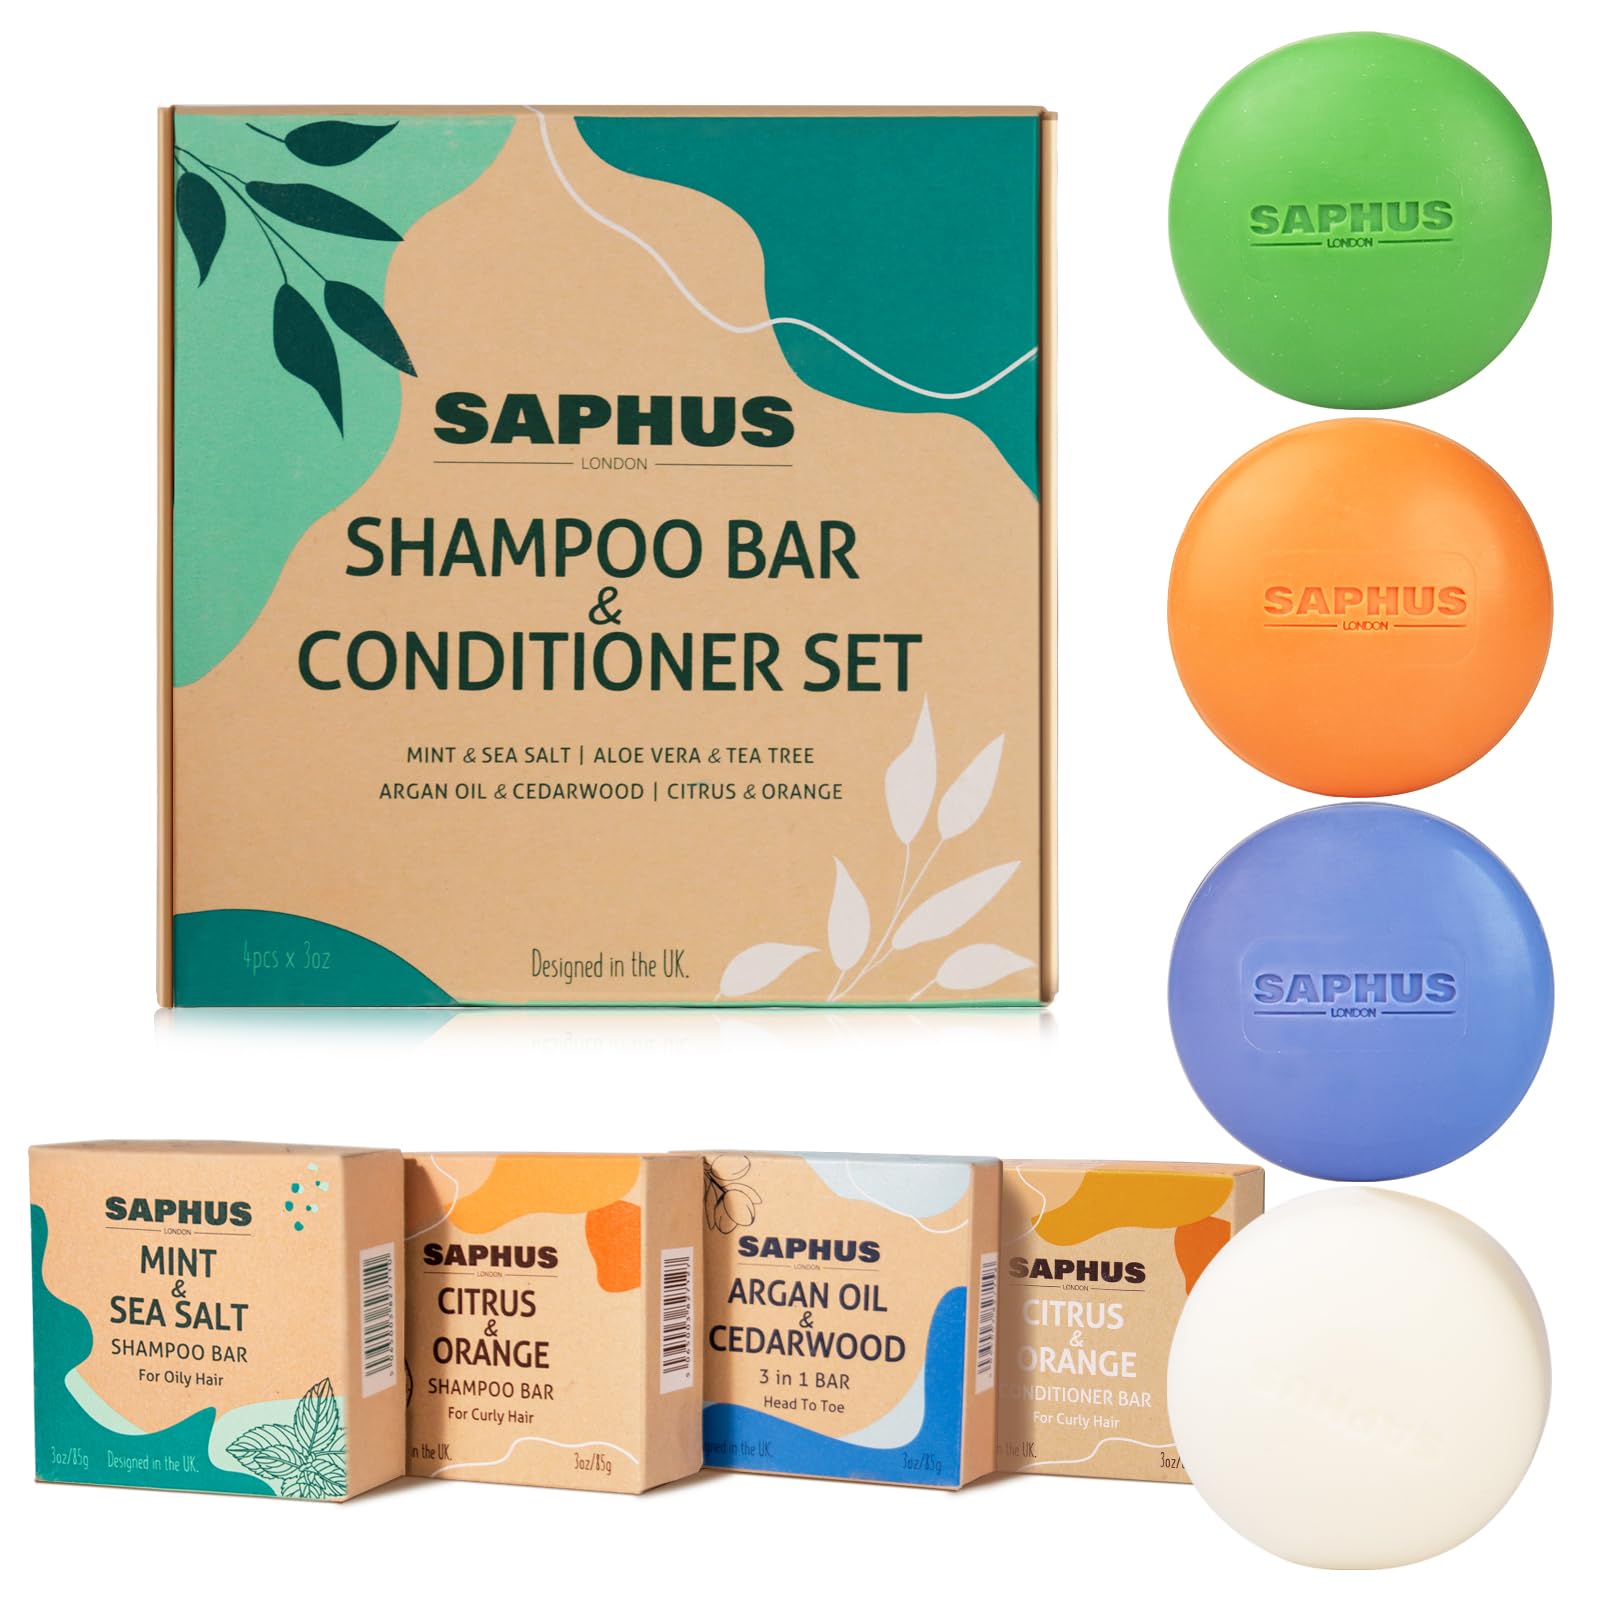 Shampoo Bars and Conditioner Bar for Hair Gift Set 4 Pack, Soap Free Solid Shampoo and Conditioner with Natural Ingredients, Moisturizing & Volumizing for All Type of Hair | Zero Waste, Sulfate Free for Women, Men, Kids